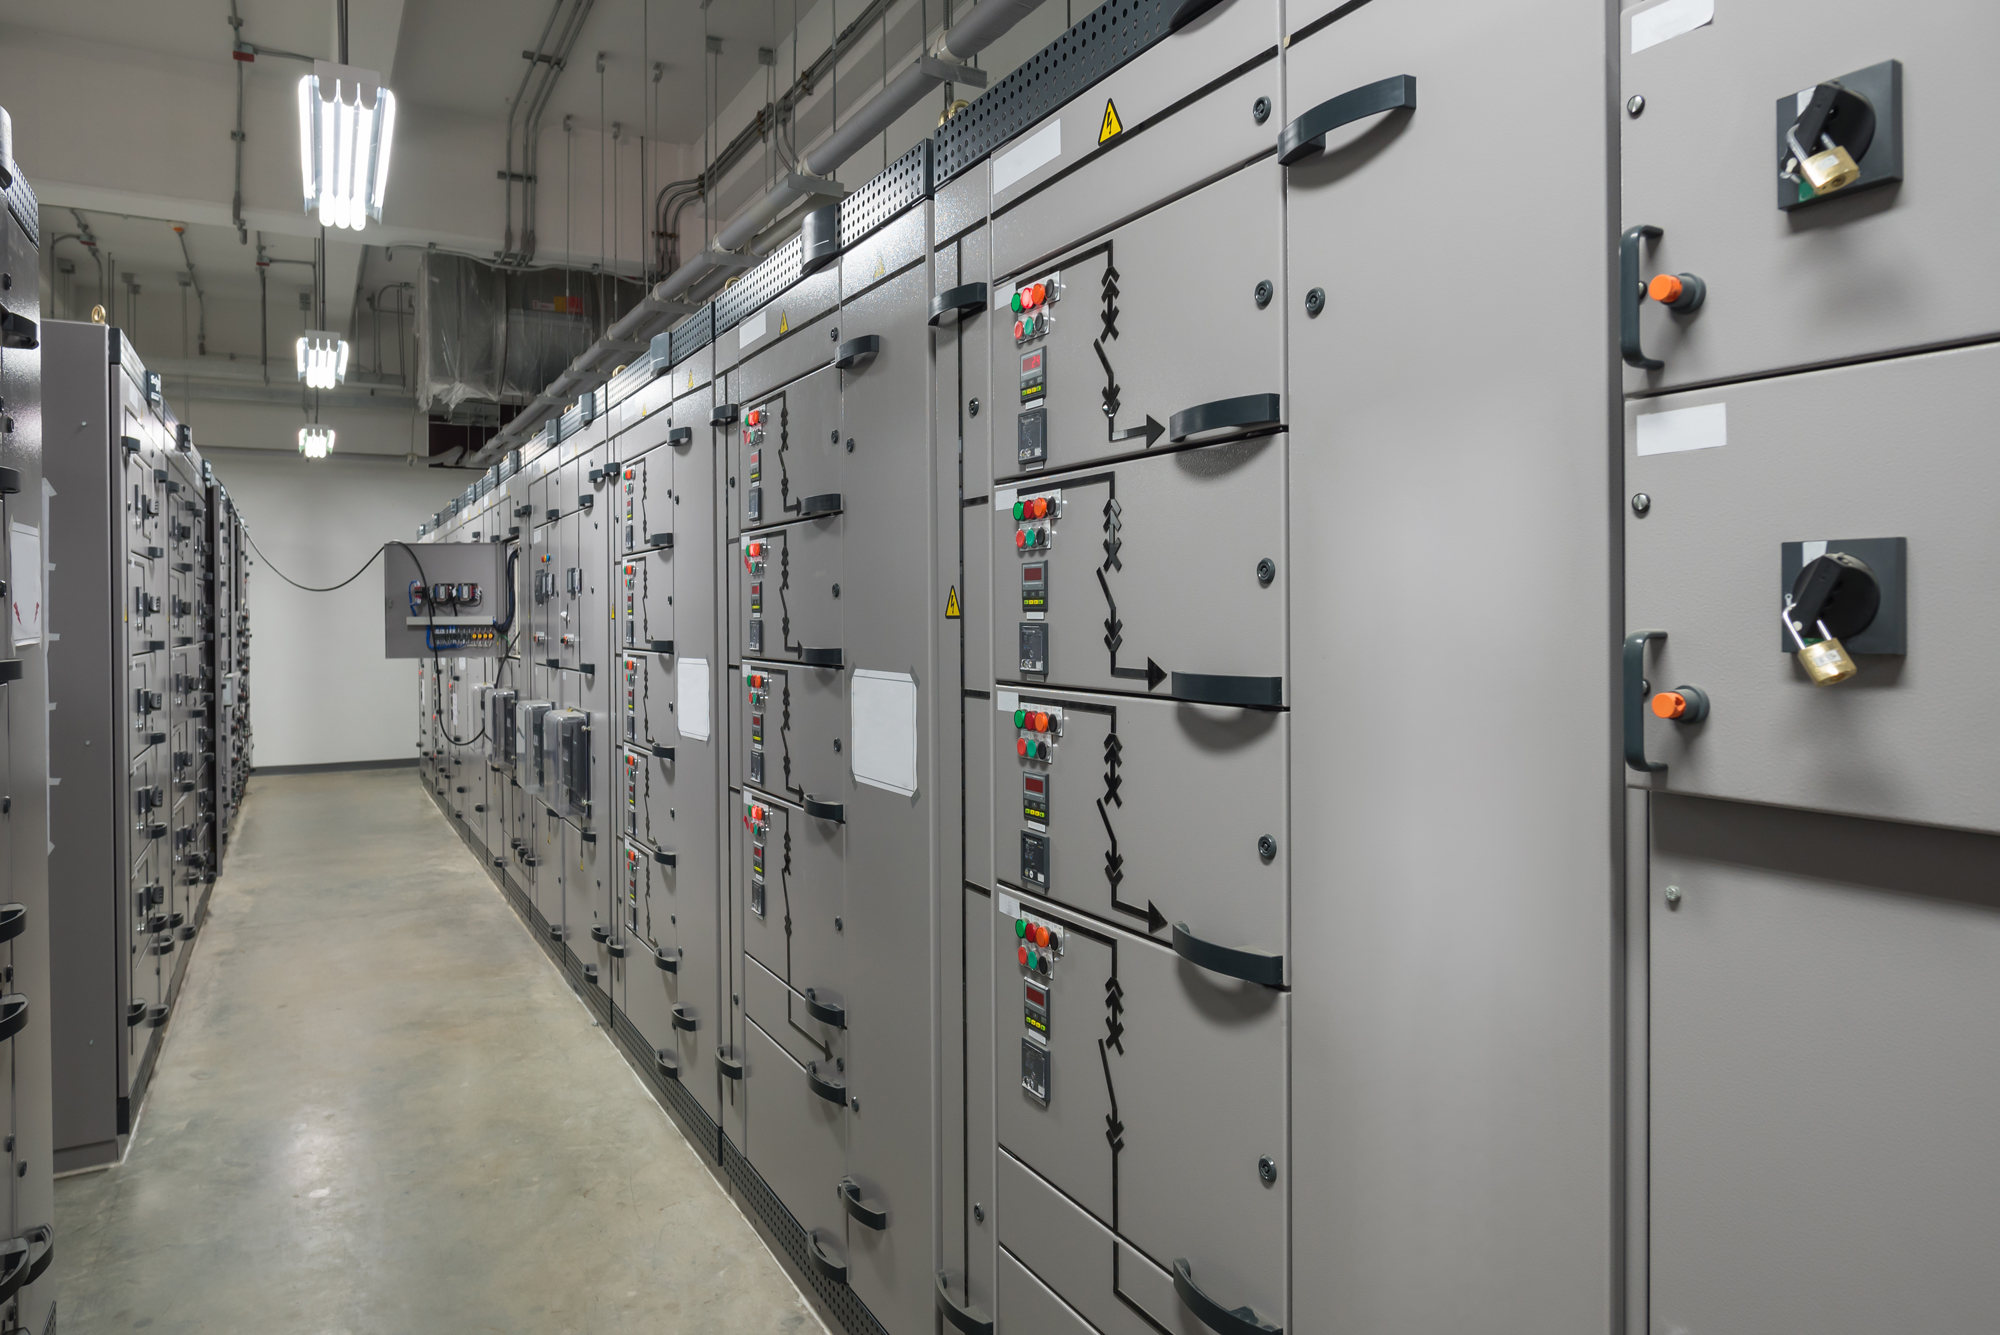 Design of electrical rooms